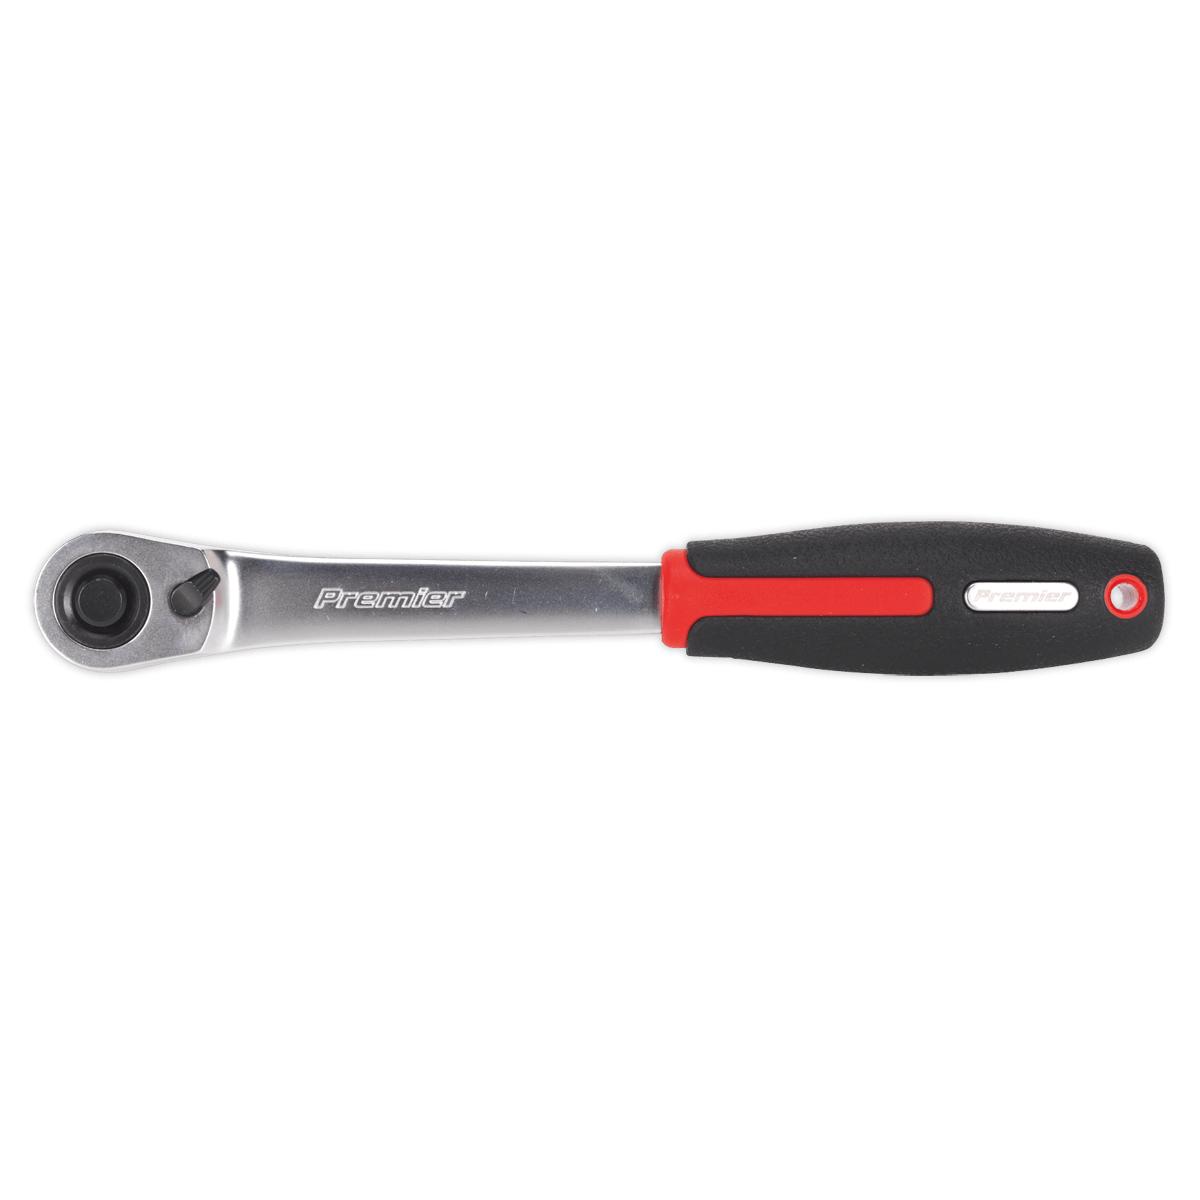 Ratchet Wrench 1/2"Sq Drive Compact Head 72-Tooth Flip Reverse Platinum Series | Chrome Vanadium steel ratchet wrench. | toolforce.ie